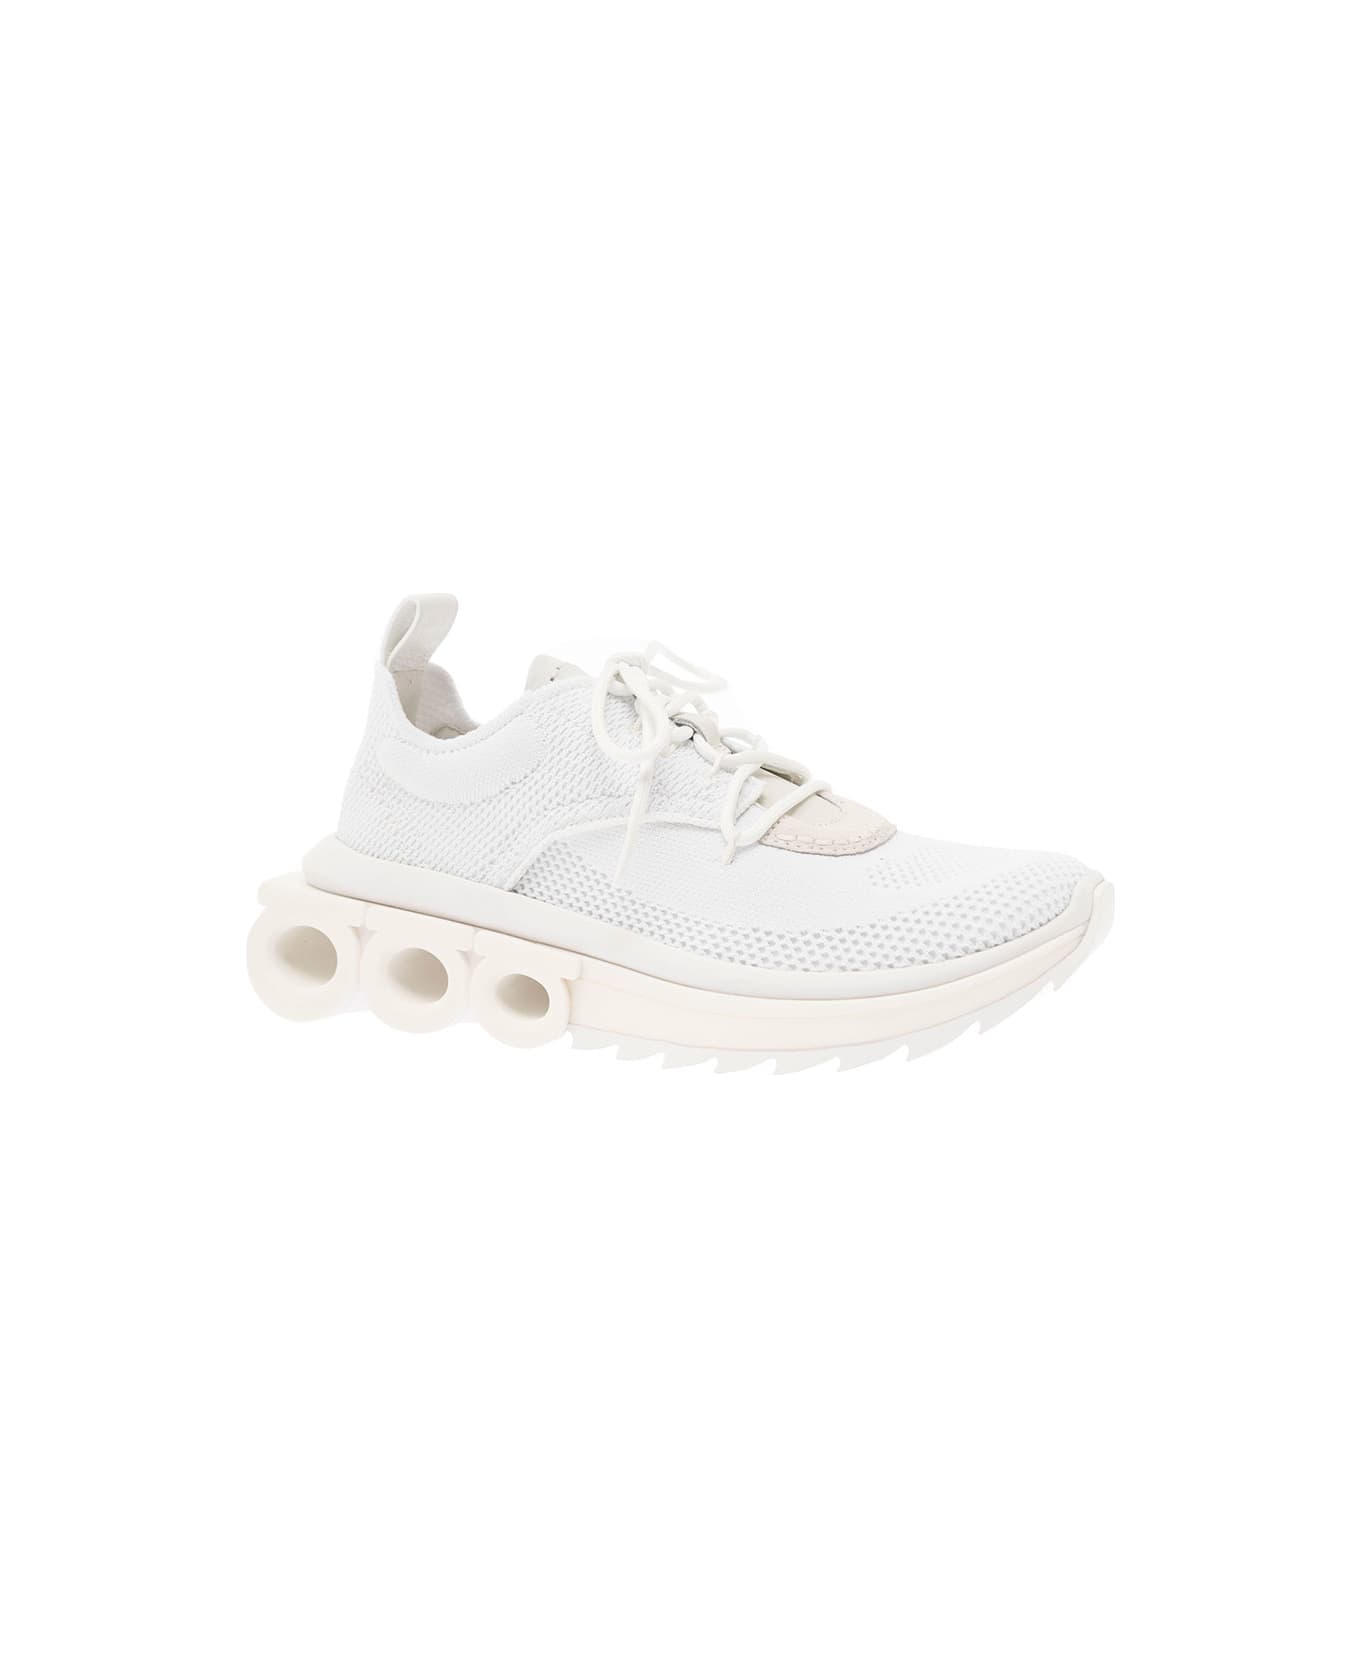 Ferragamo 'nima' White Low Top Sneakers With Gancini Detail In Mixed Materials Woman - White スニーカー